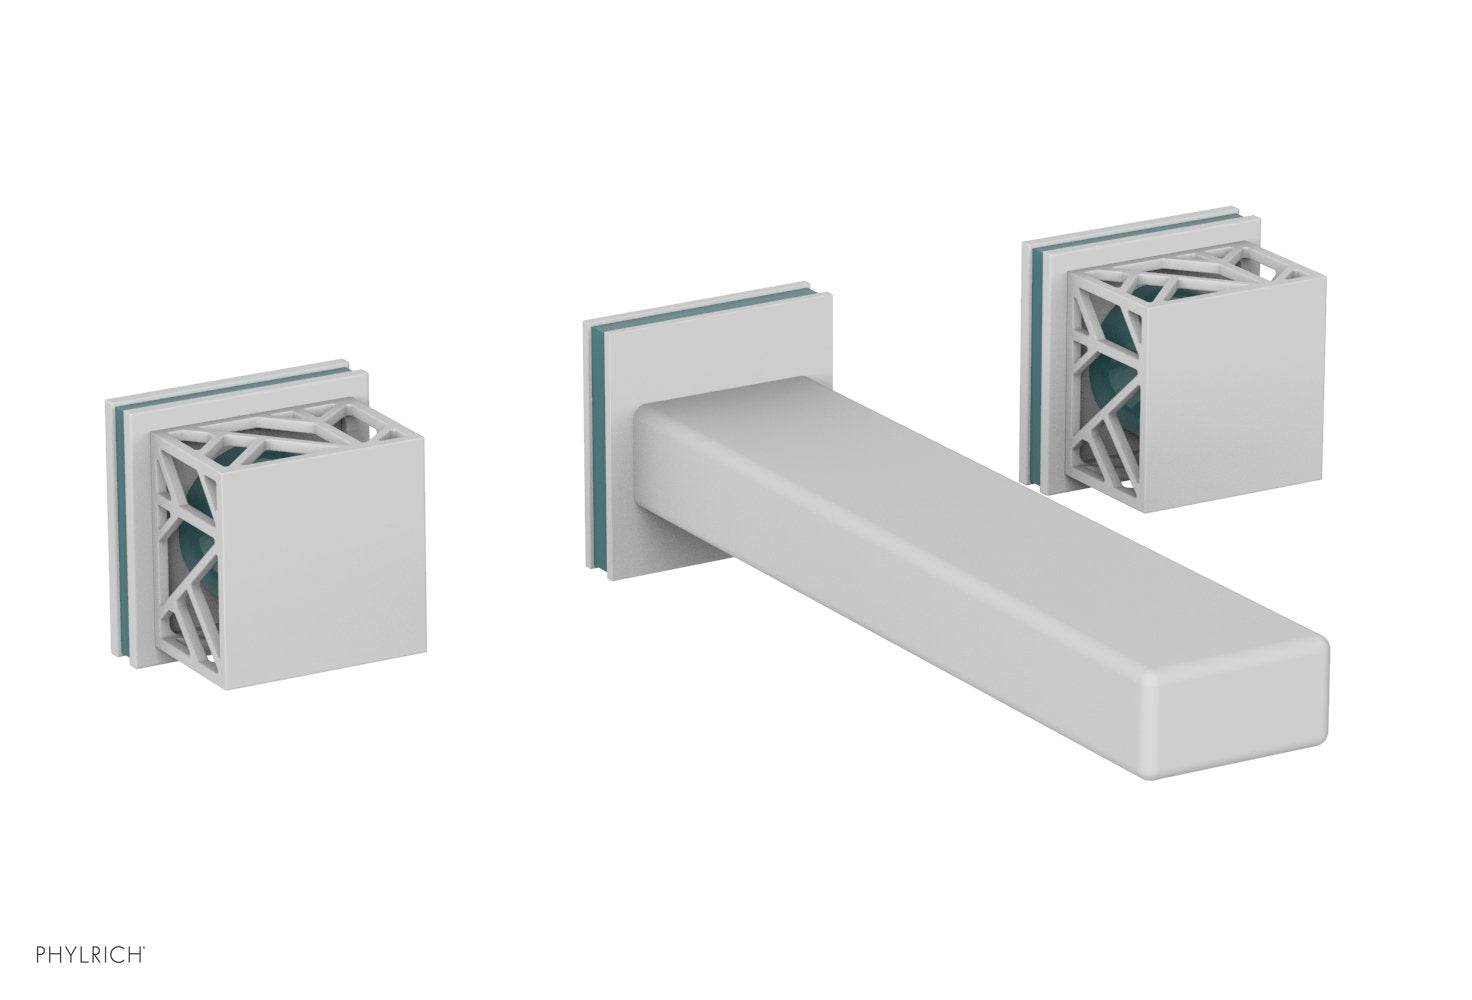 Phylrich JOLIE Wall Lavatory Set - Square Handles with "Turquoise" Accents